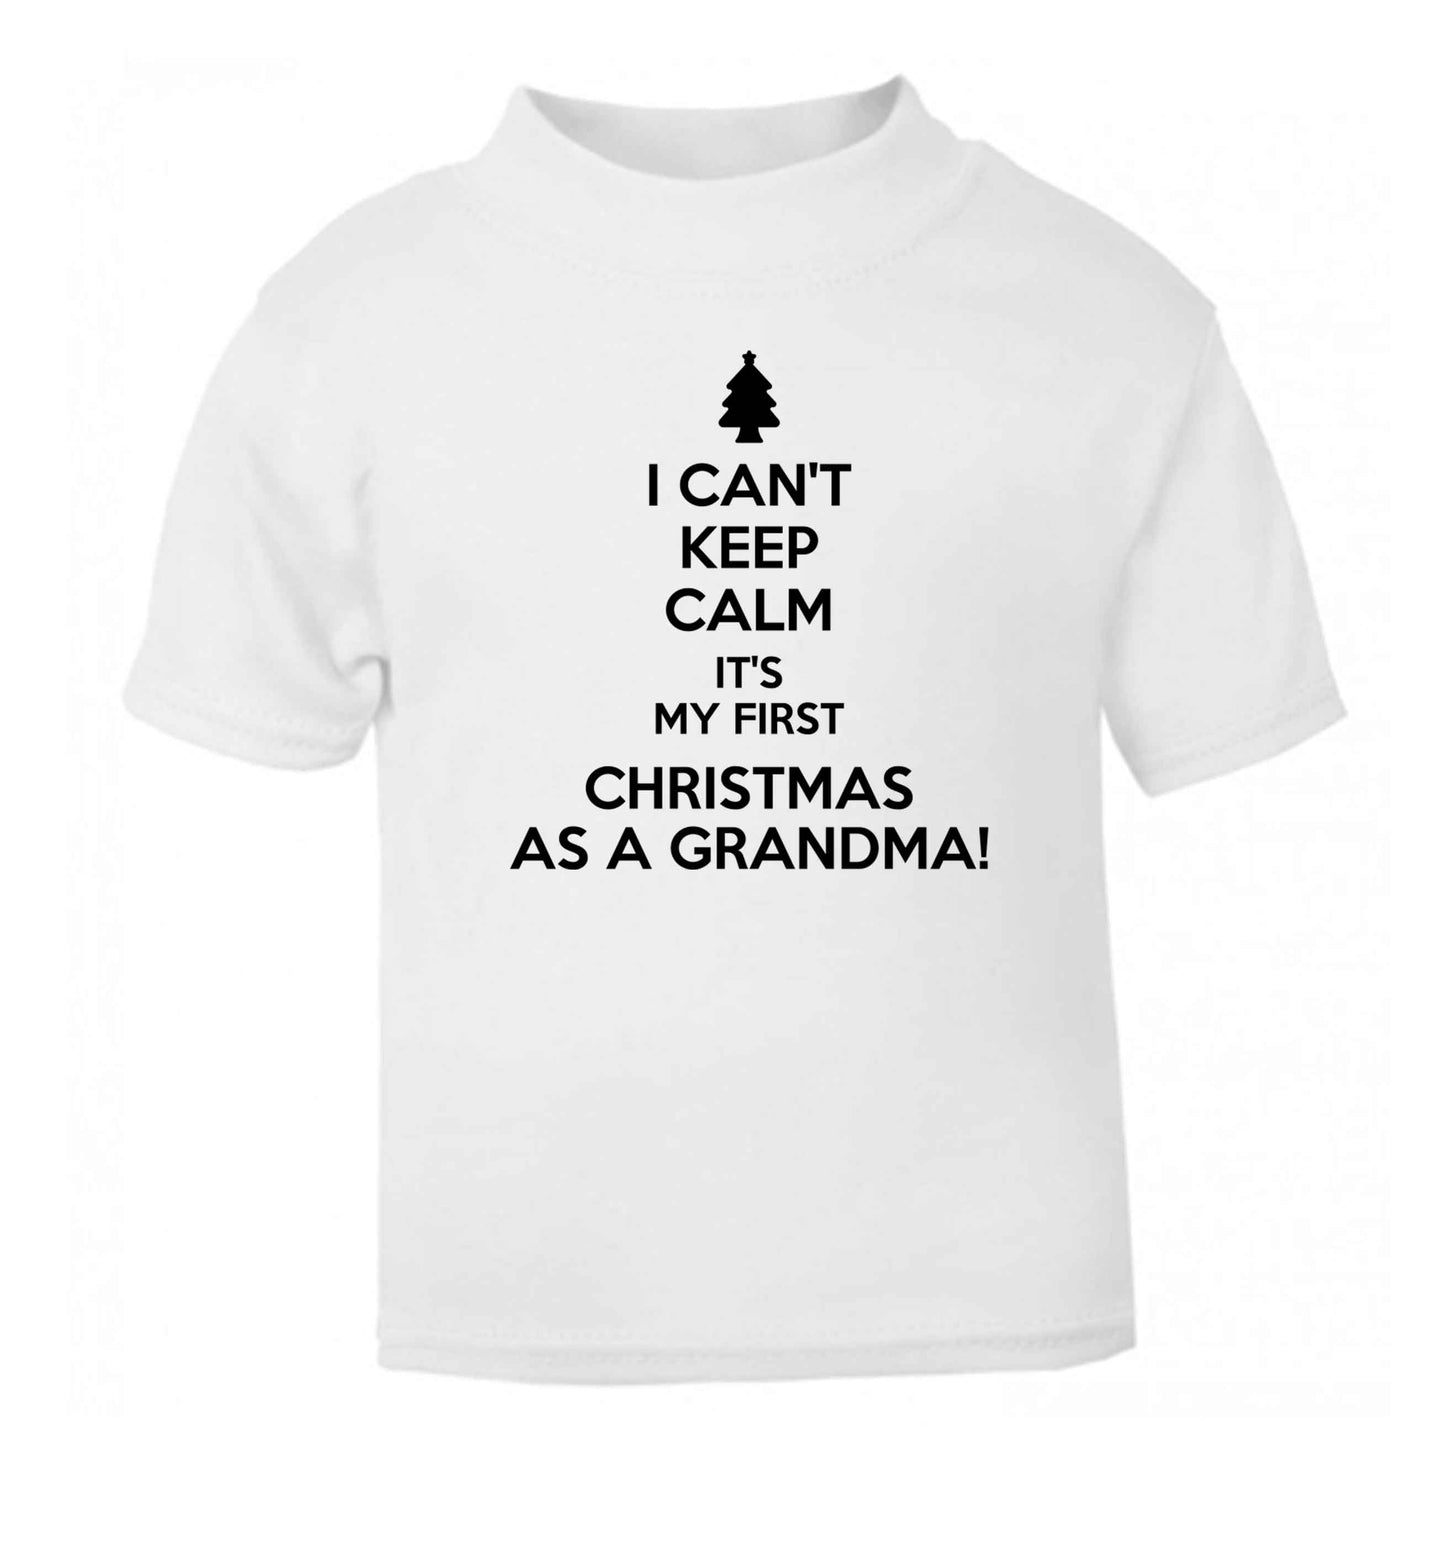 I can't keep calm it's my first Christmas as a grandma! white Baby Toddler Tshirt 2 Years